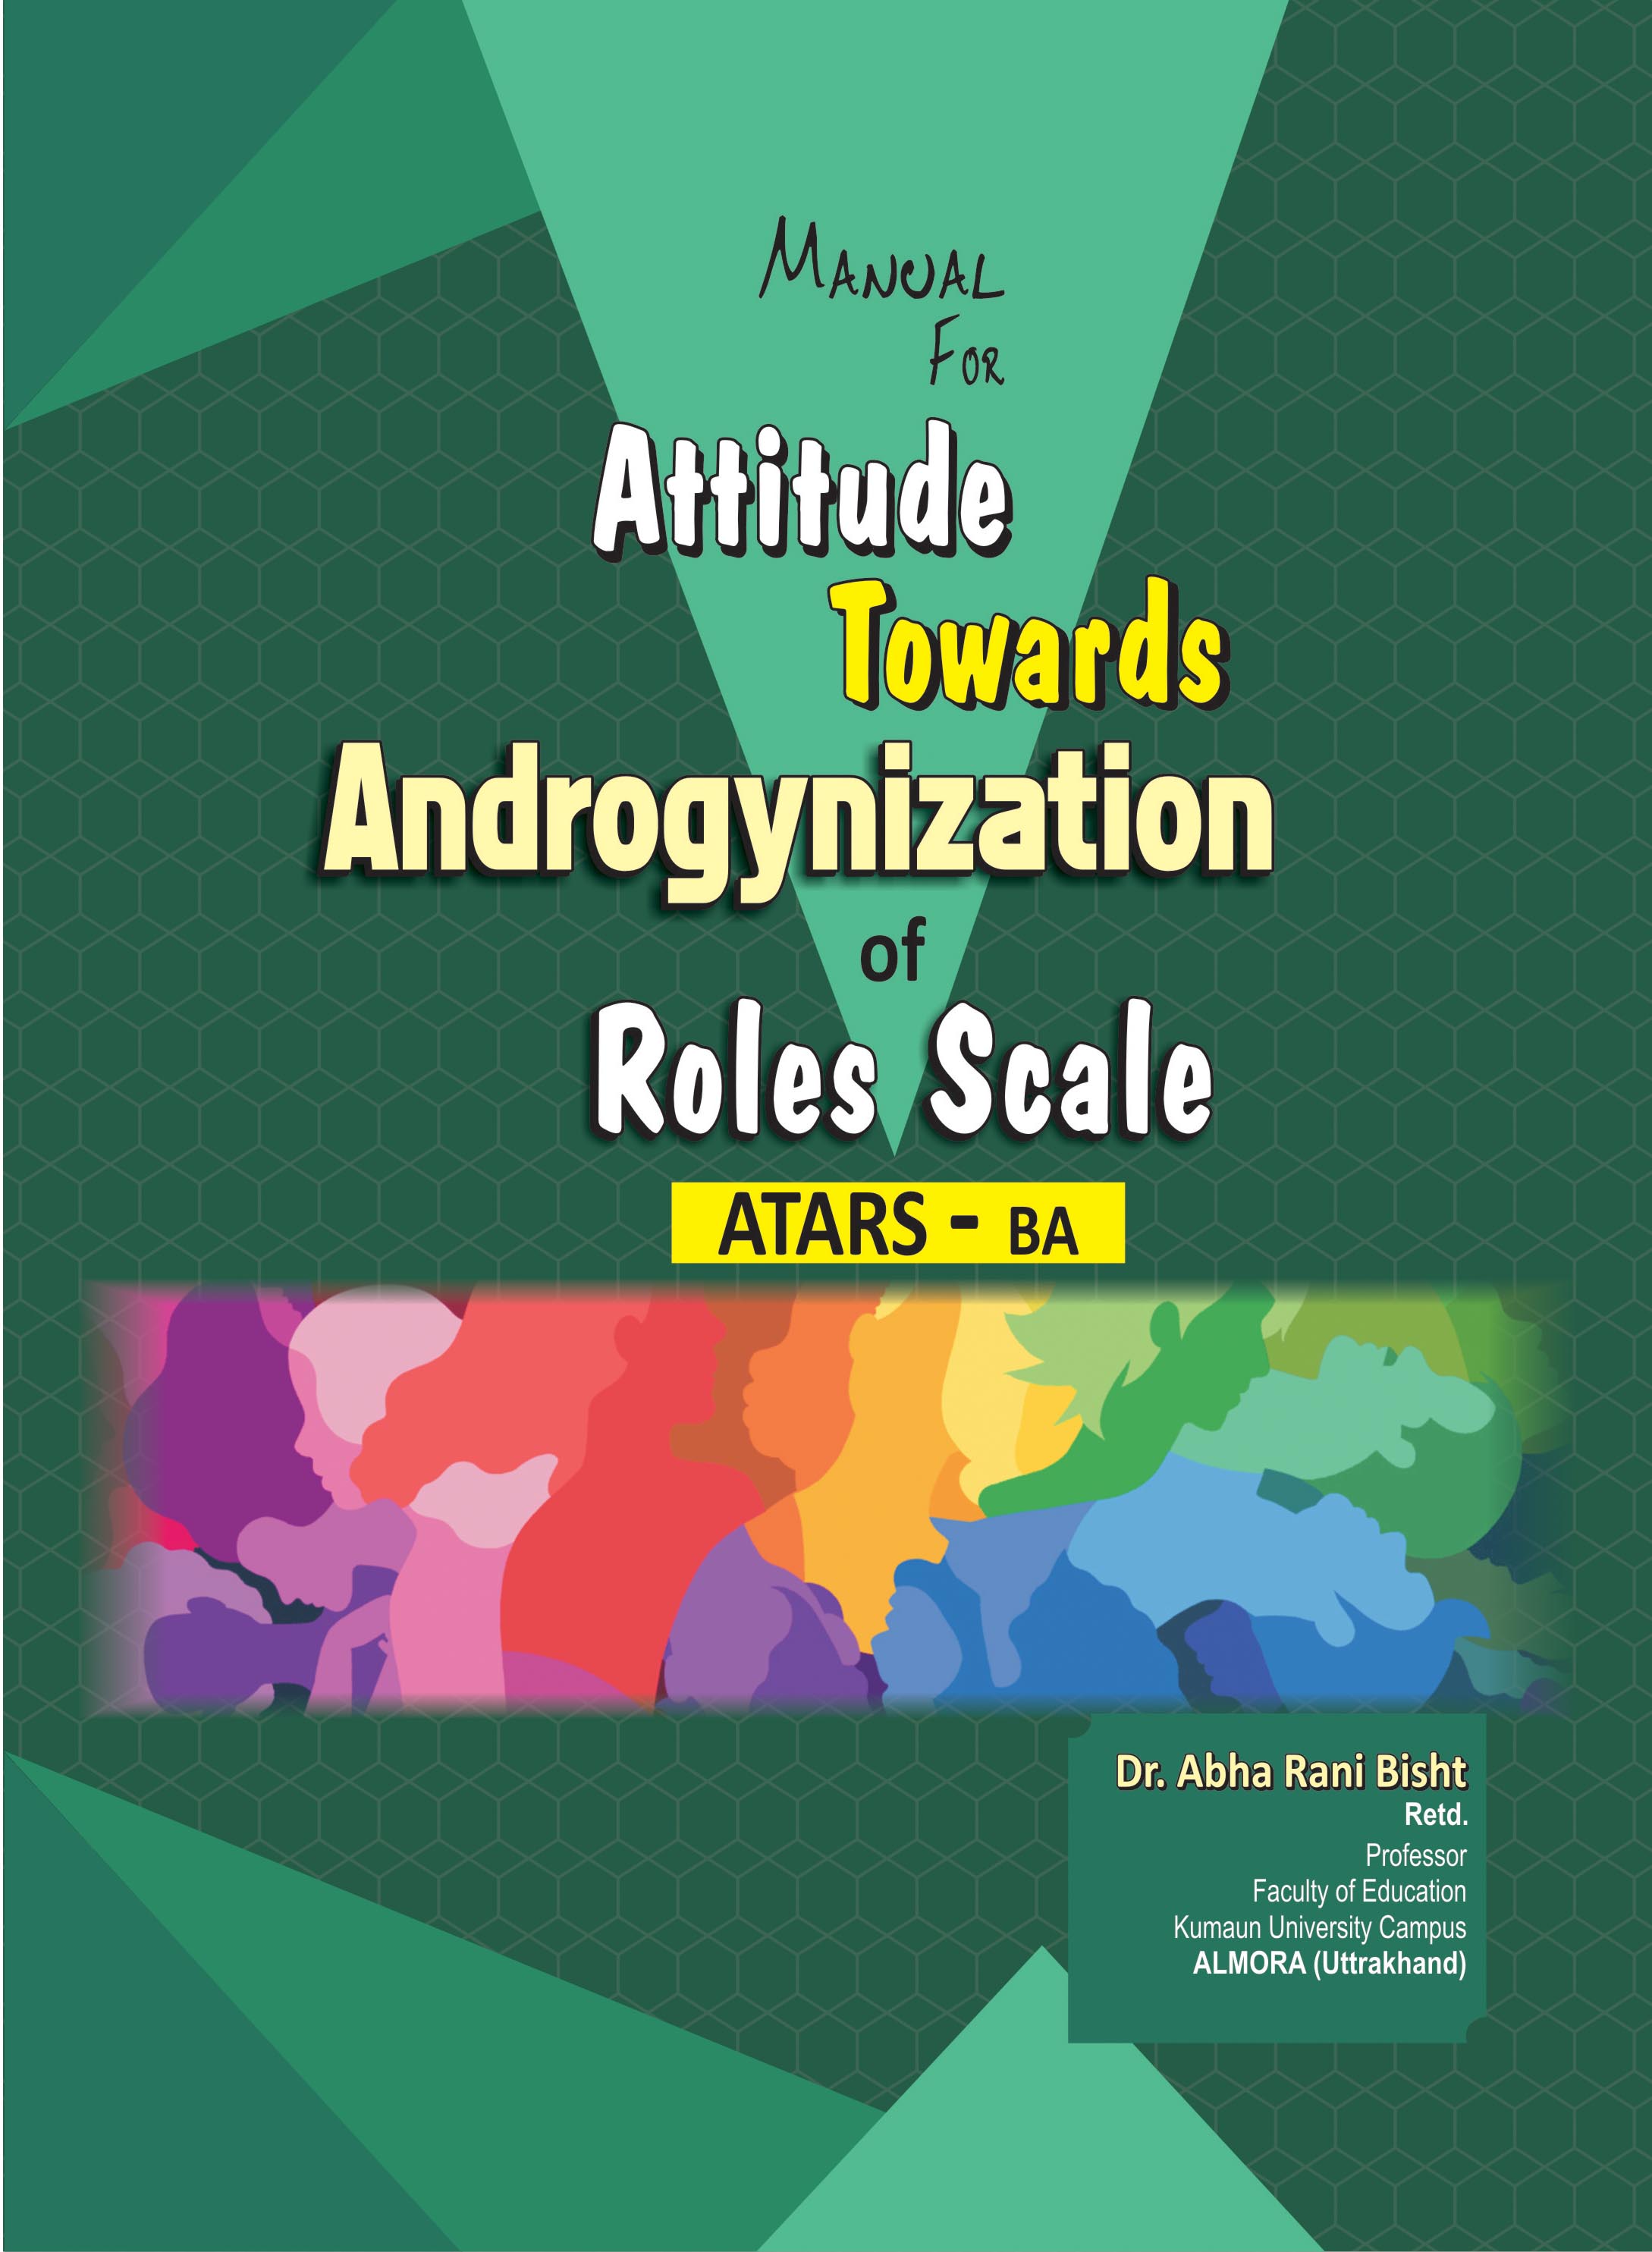 ATTITUDE-TOWARDS-ANDROGYNIZATION-OF-ROLES-SCALE-